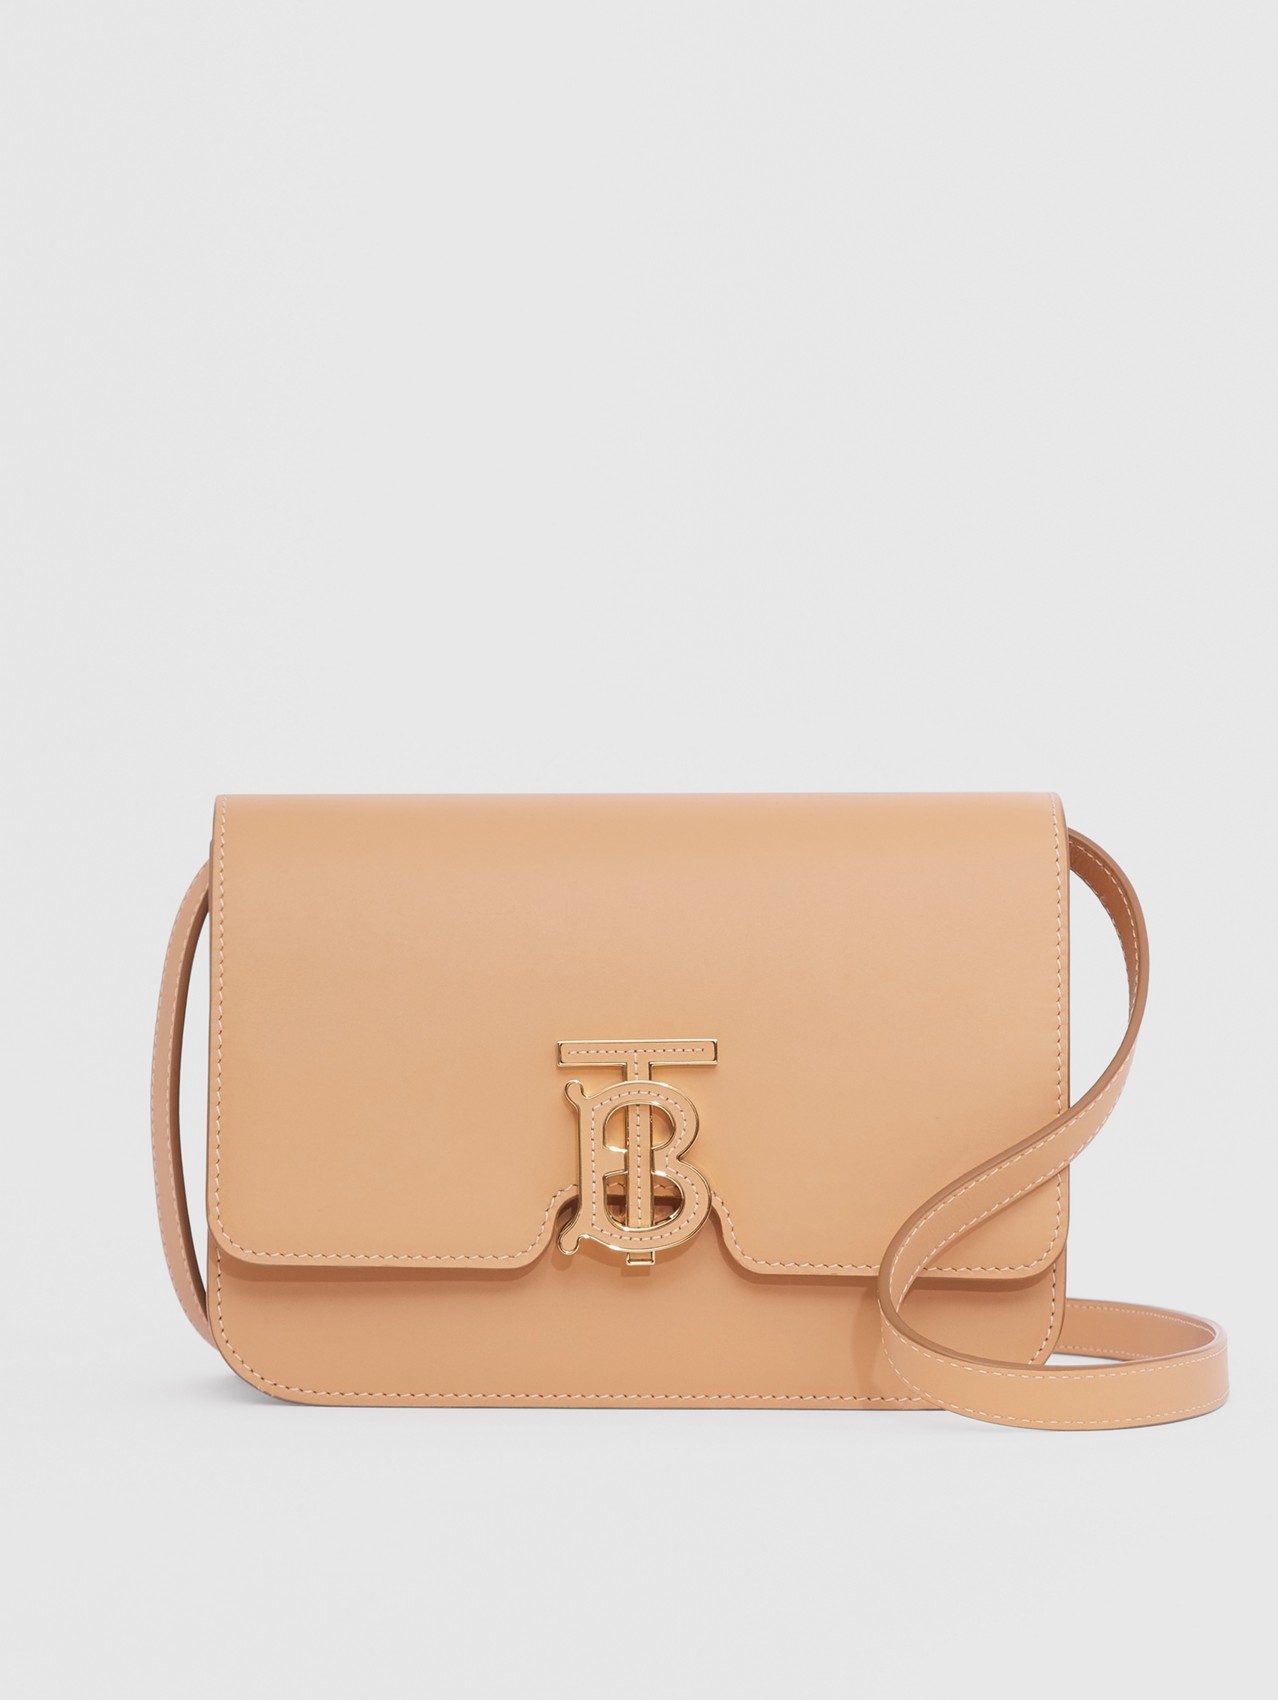 Small Leather TB Bag in Warm Sand